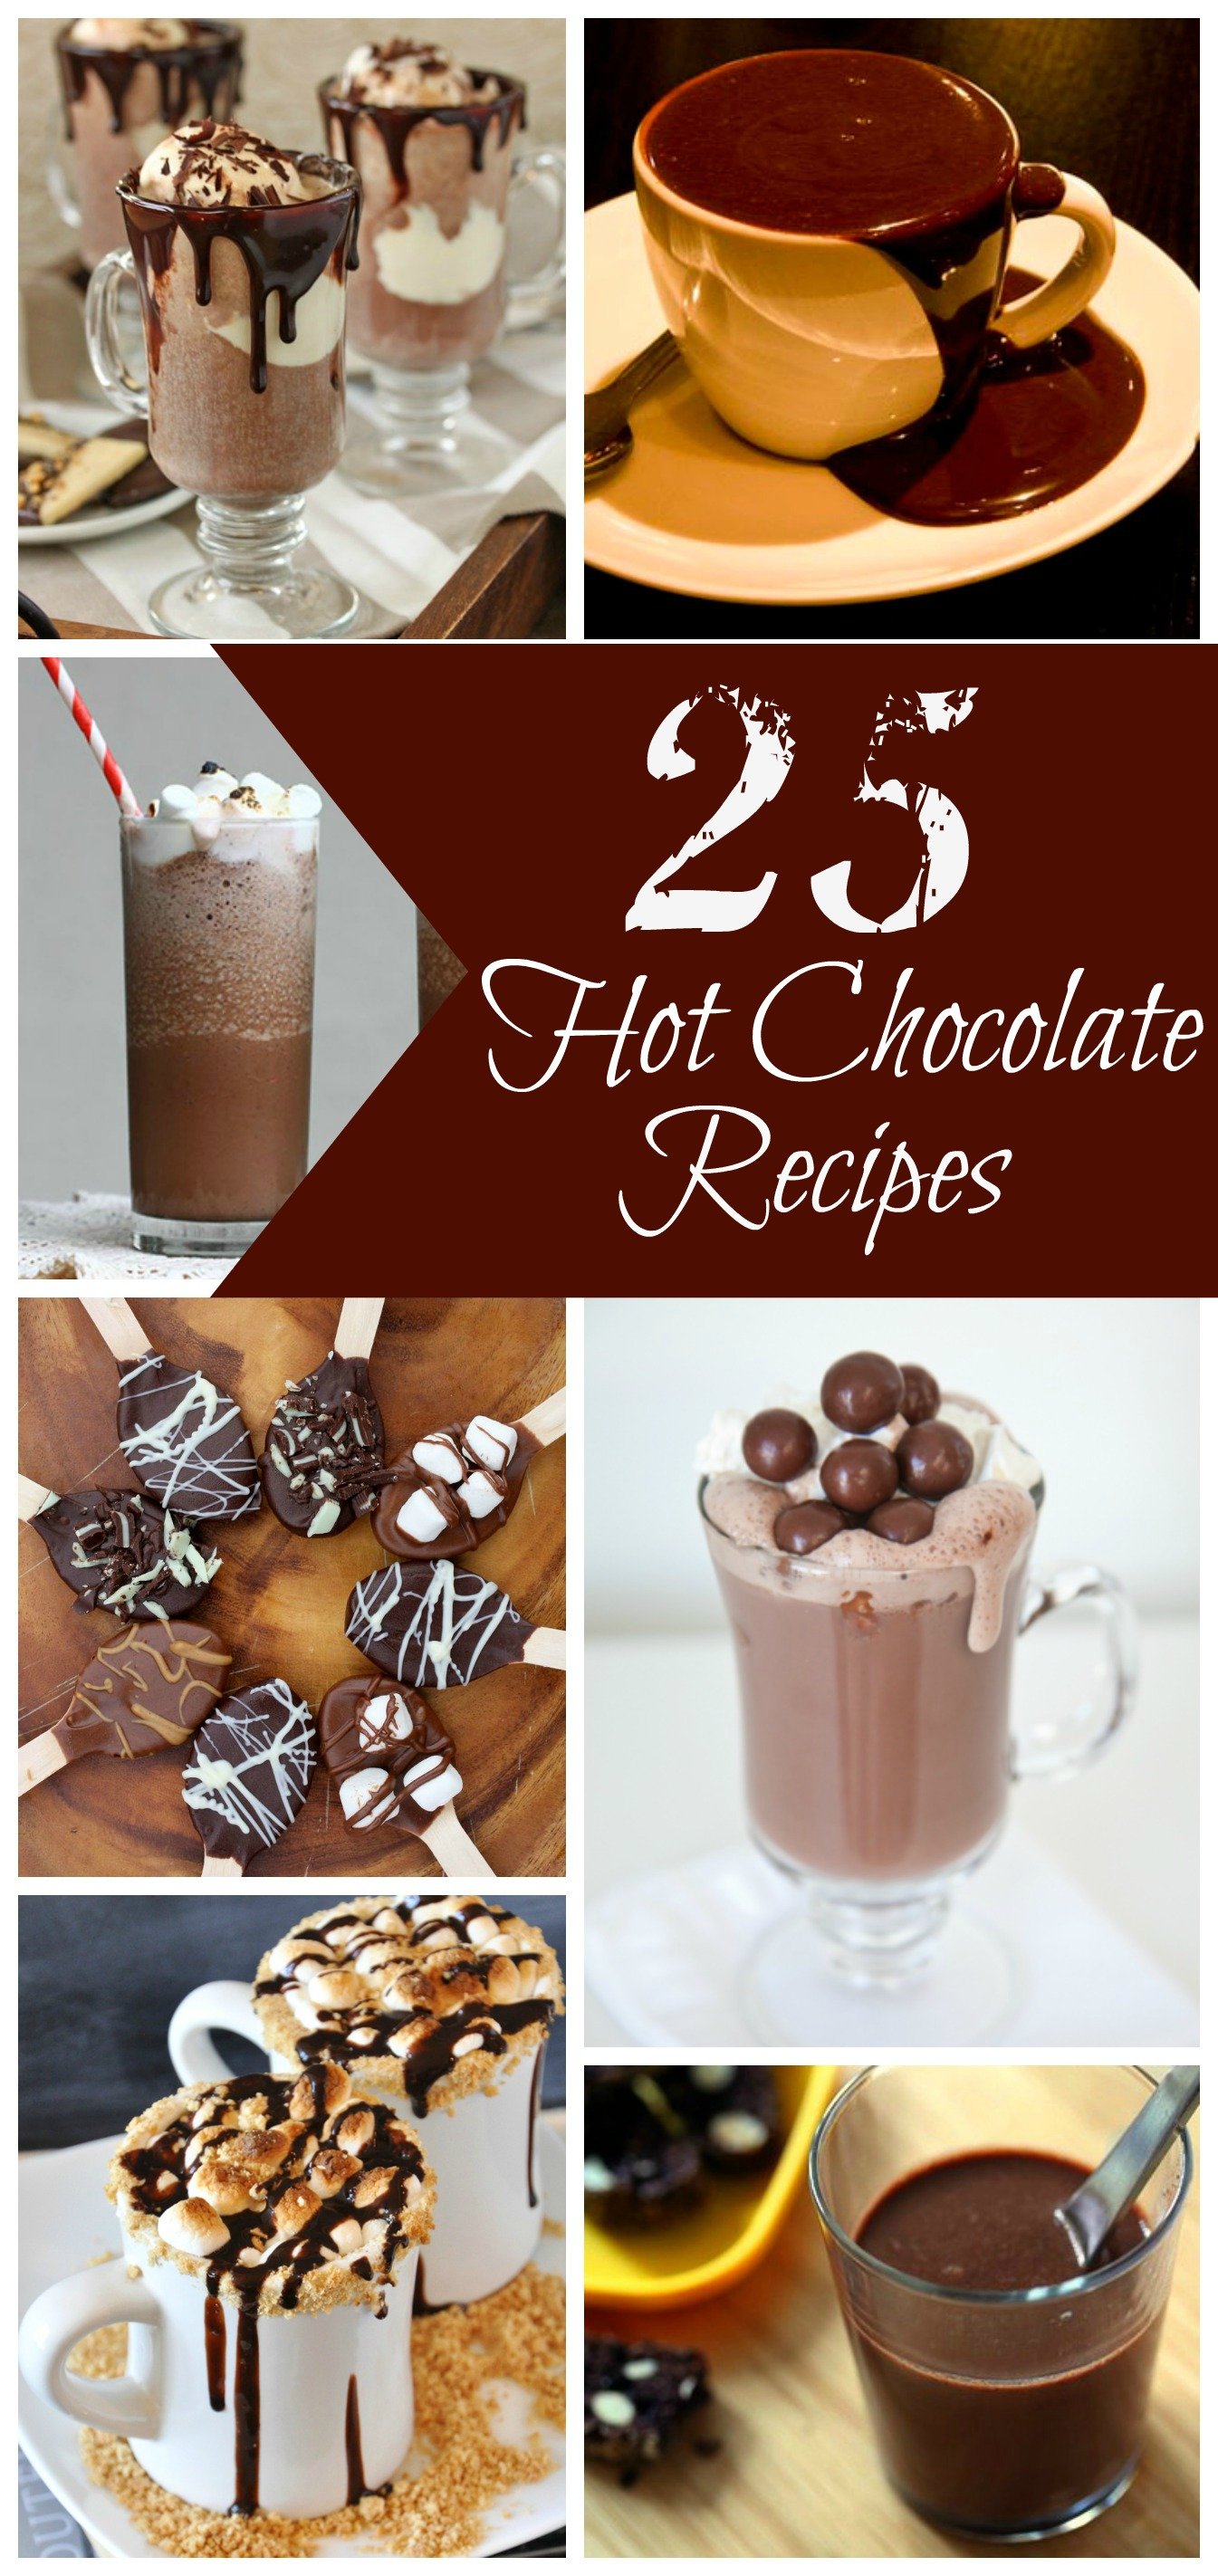 25 Great Hot Chocolate Recipes